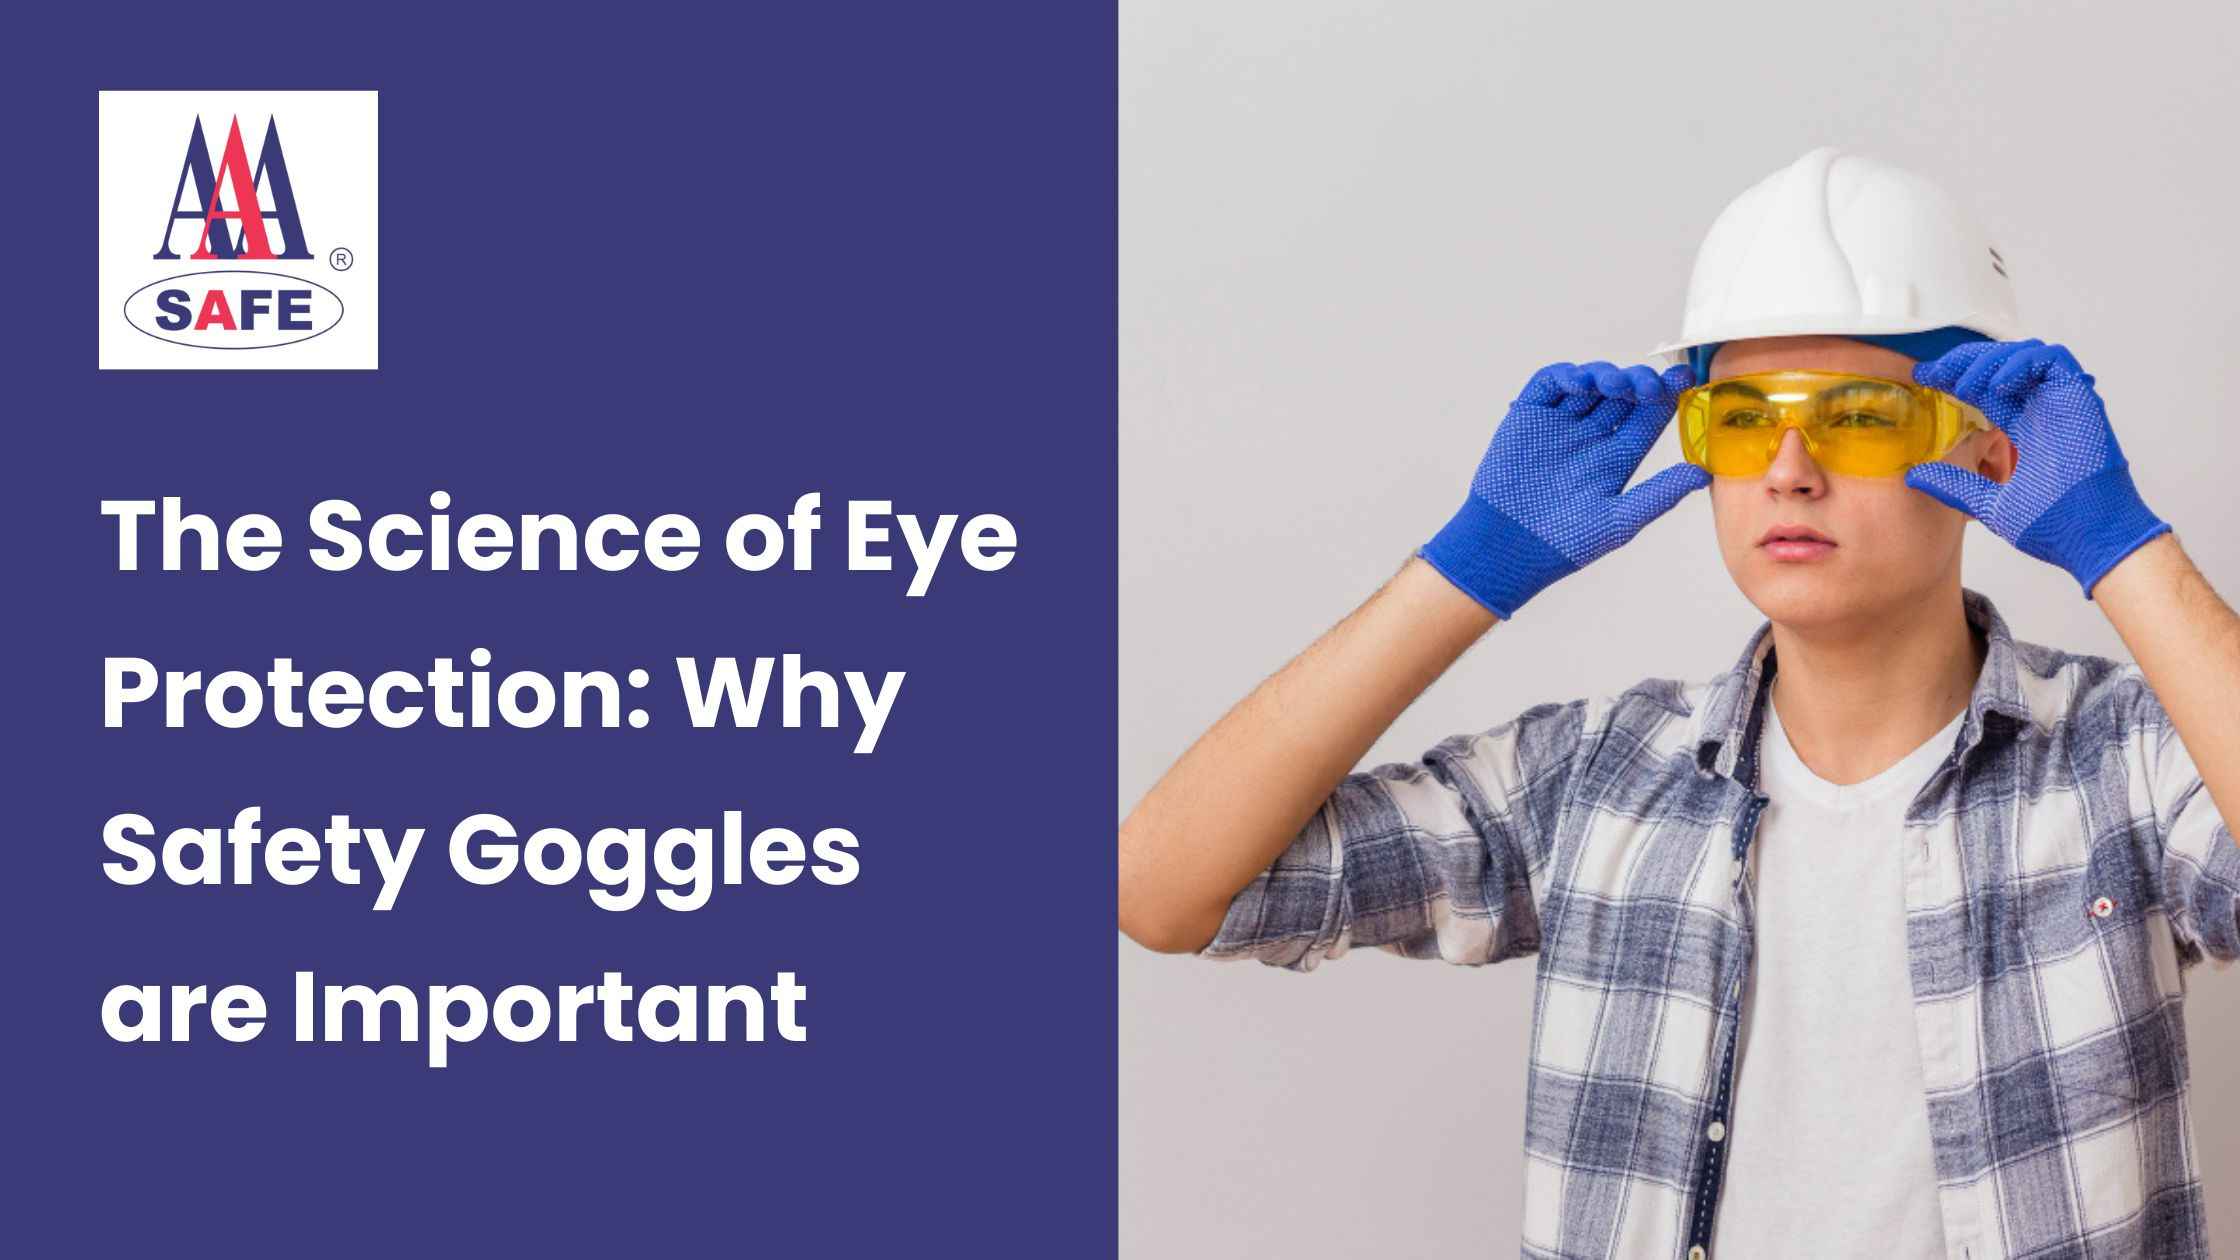 The Science of Eye Protection: Why Safety Goggles are Important